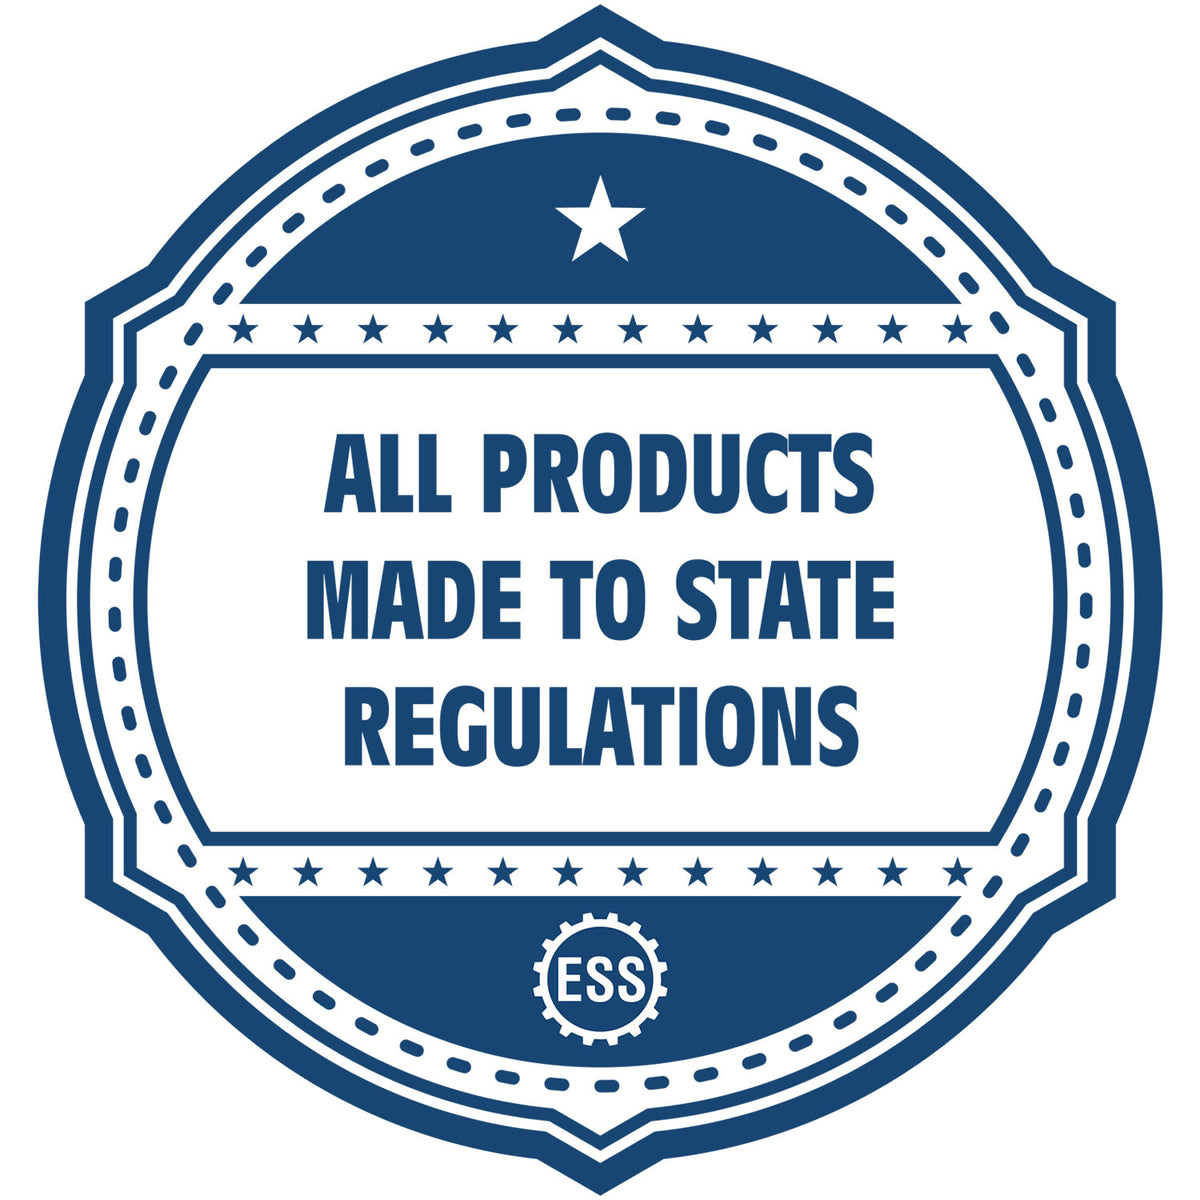 An icon or badge element for the PSI Puerto Rico Notary Stamp showing that this product is made in compliance with state regulations.